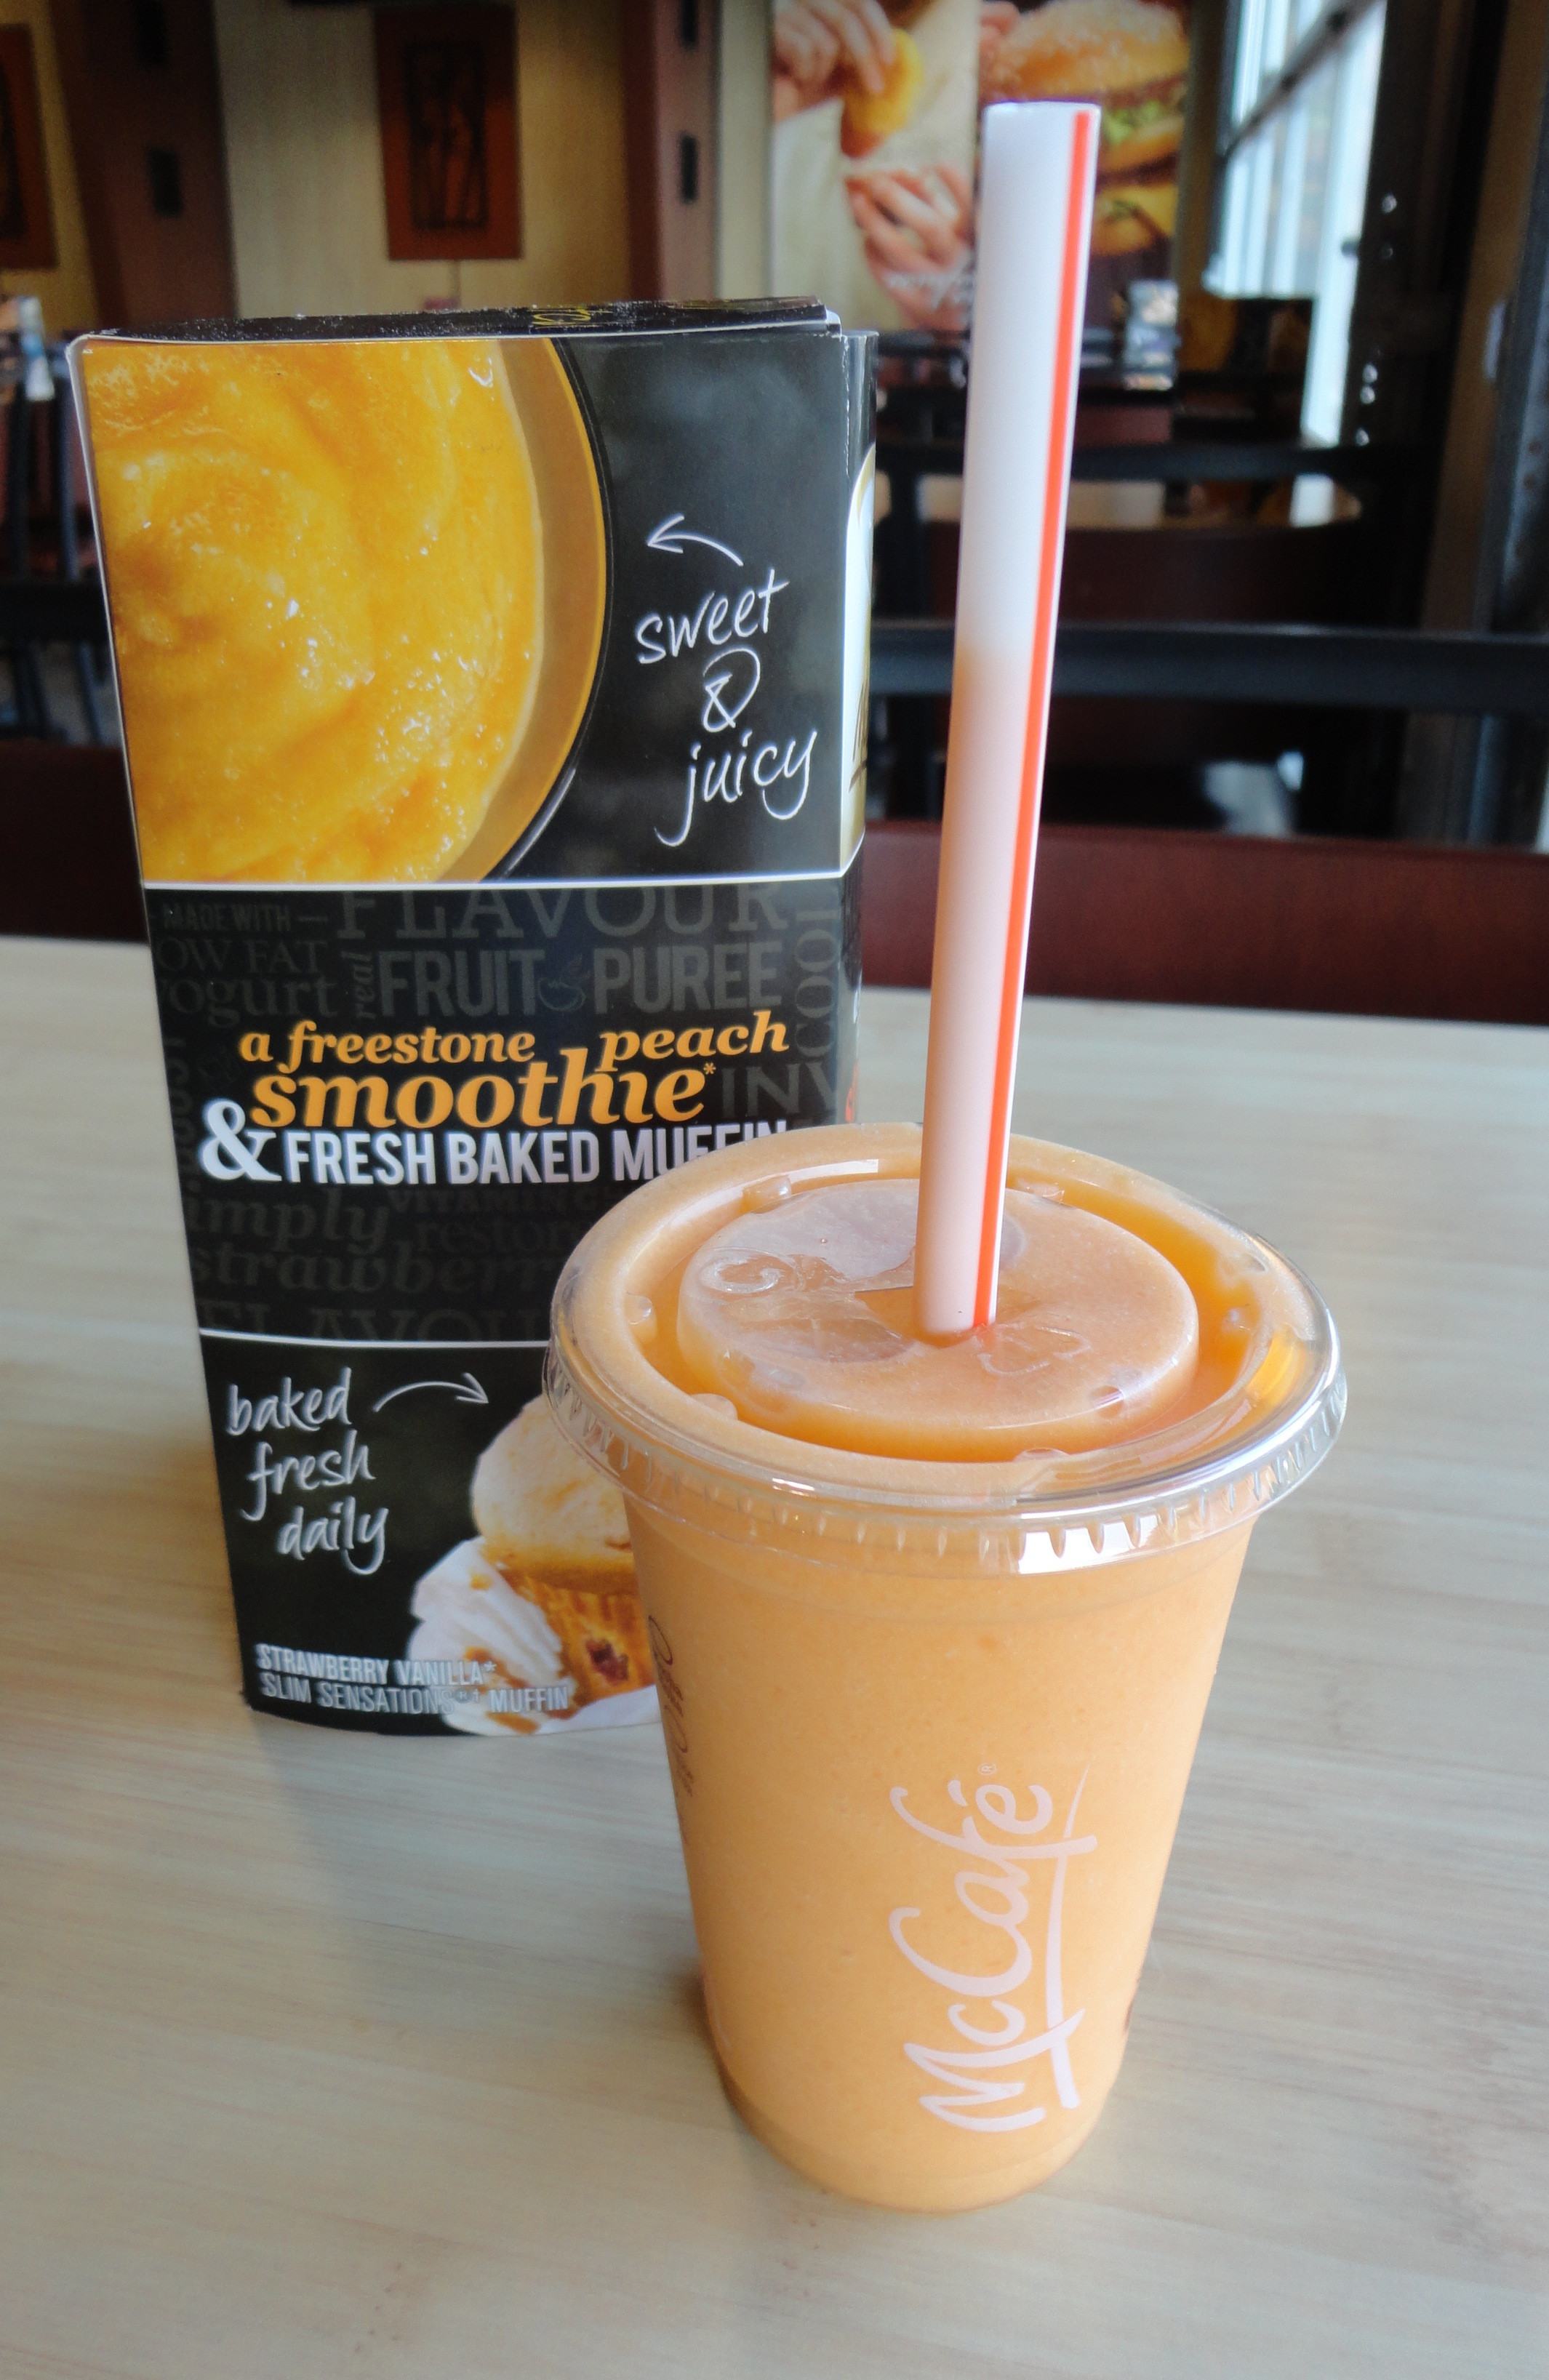 Are Smoothies From Mcdonalds Healthy
 mango pineapple smoothie mcdonalds calories medium